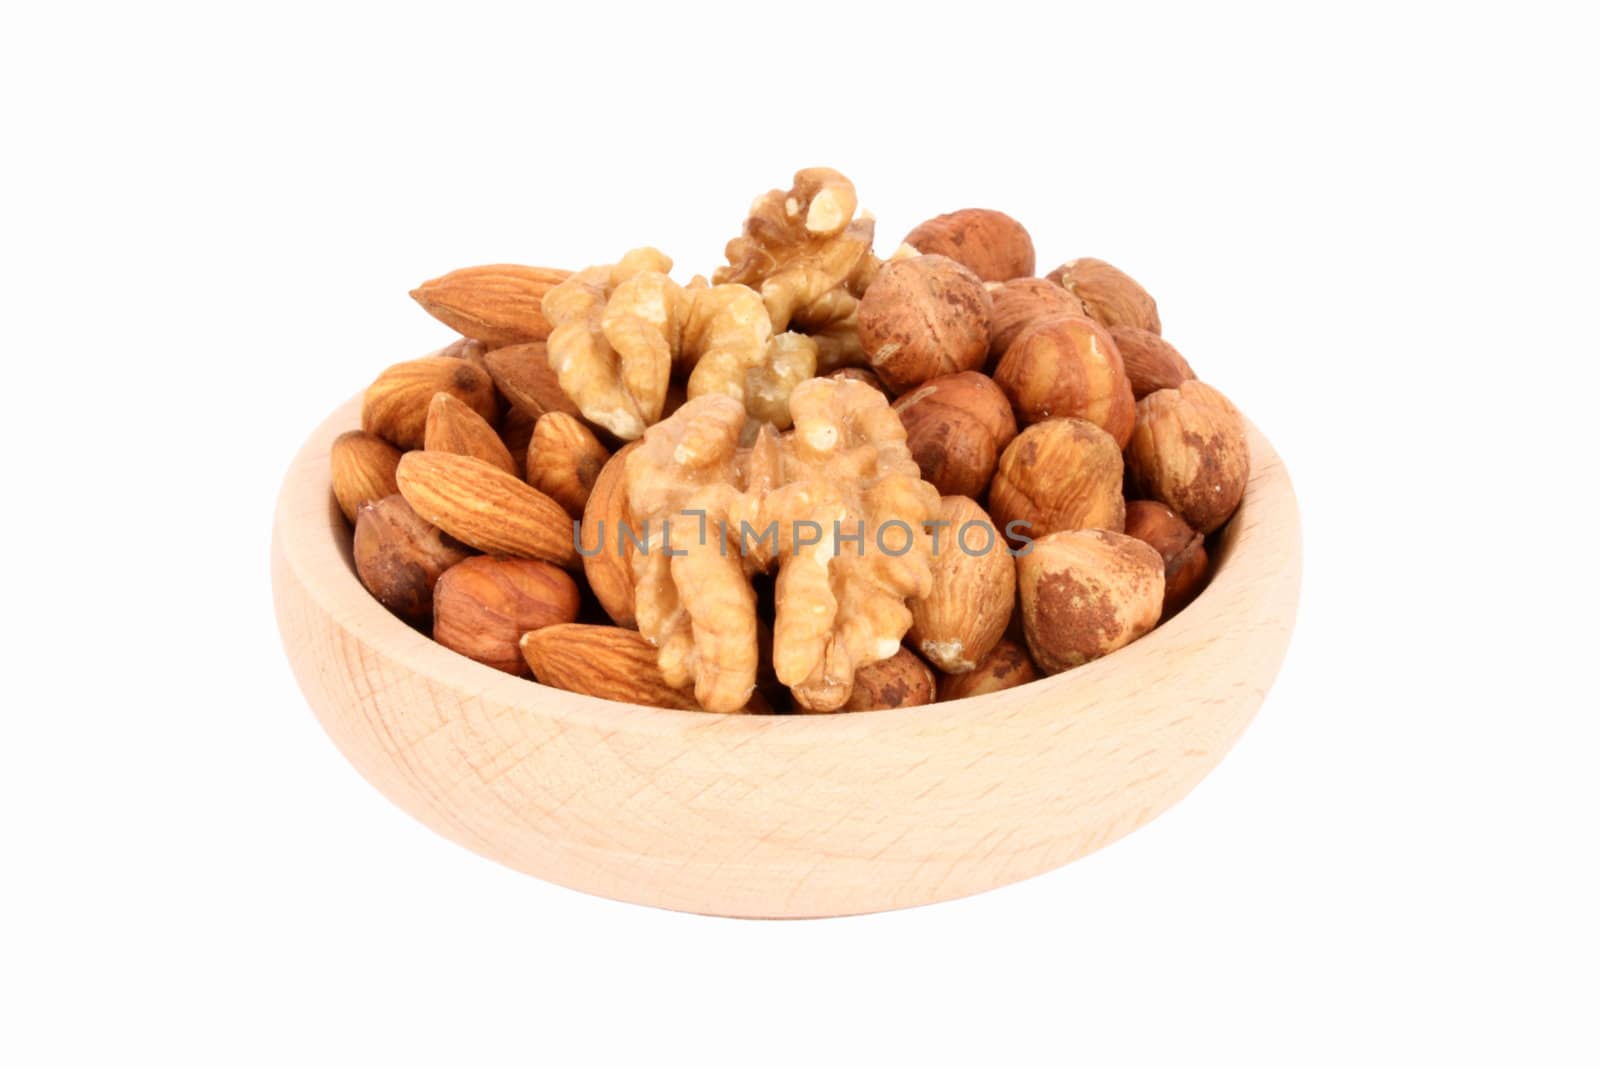 Wood bowl full of walnuts, almonds and hazelnuts, isolated